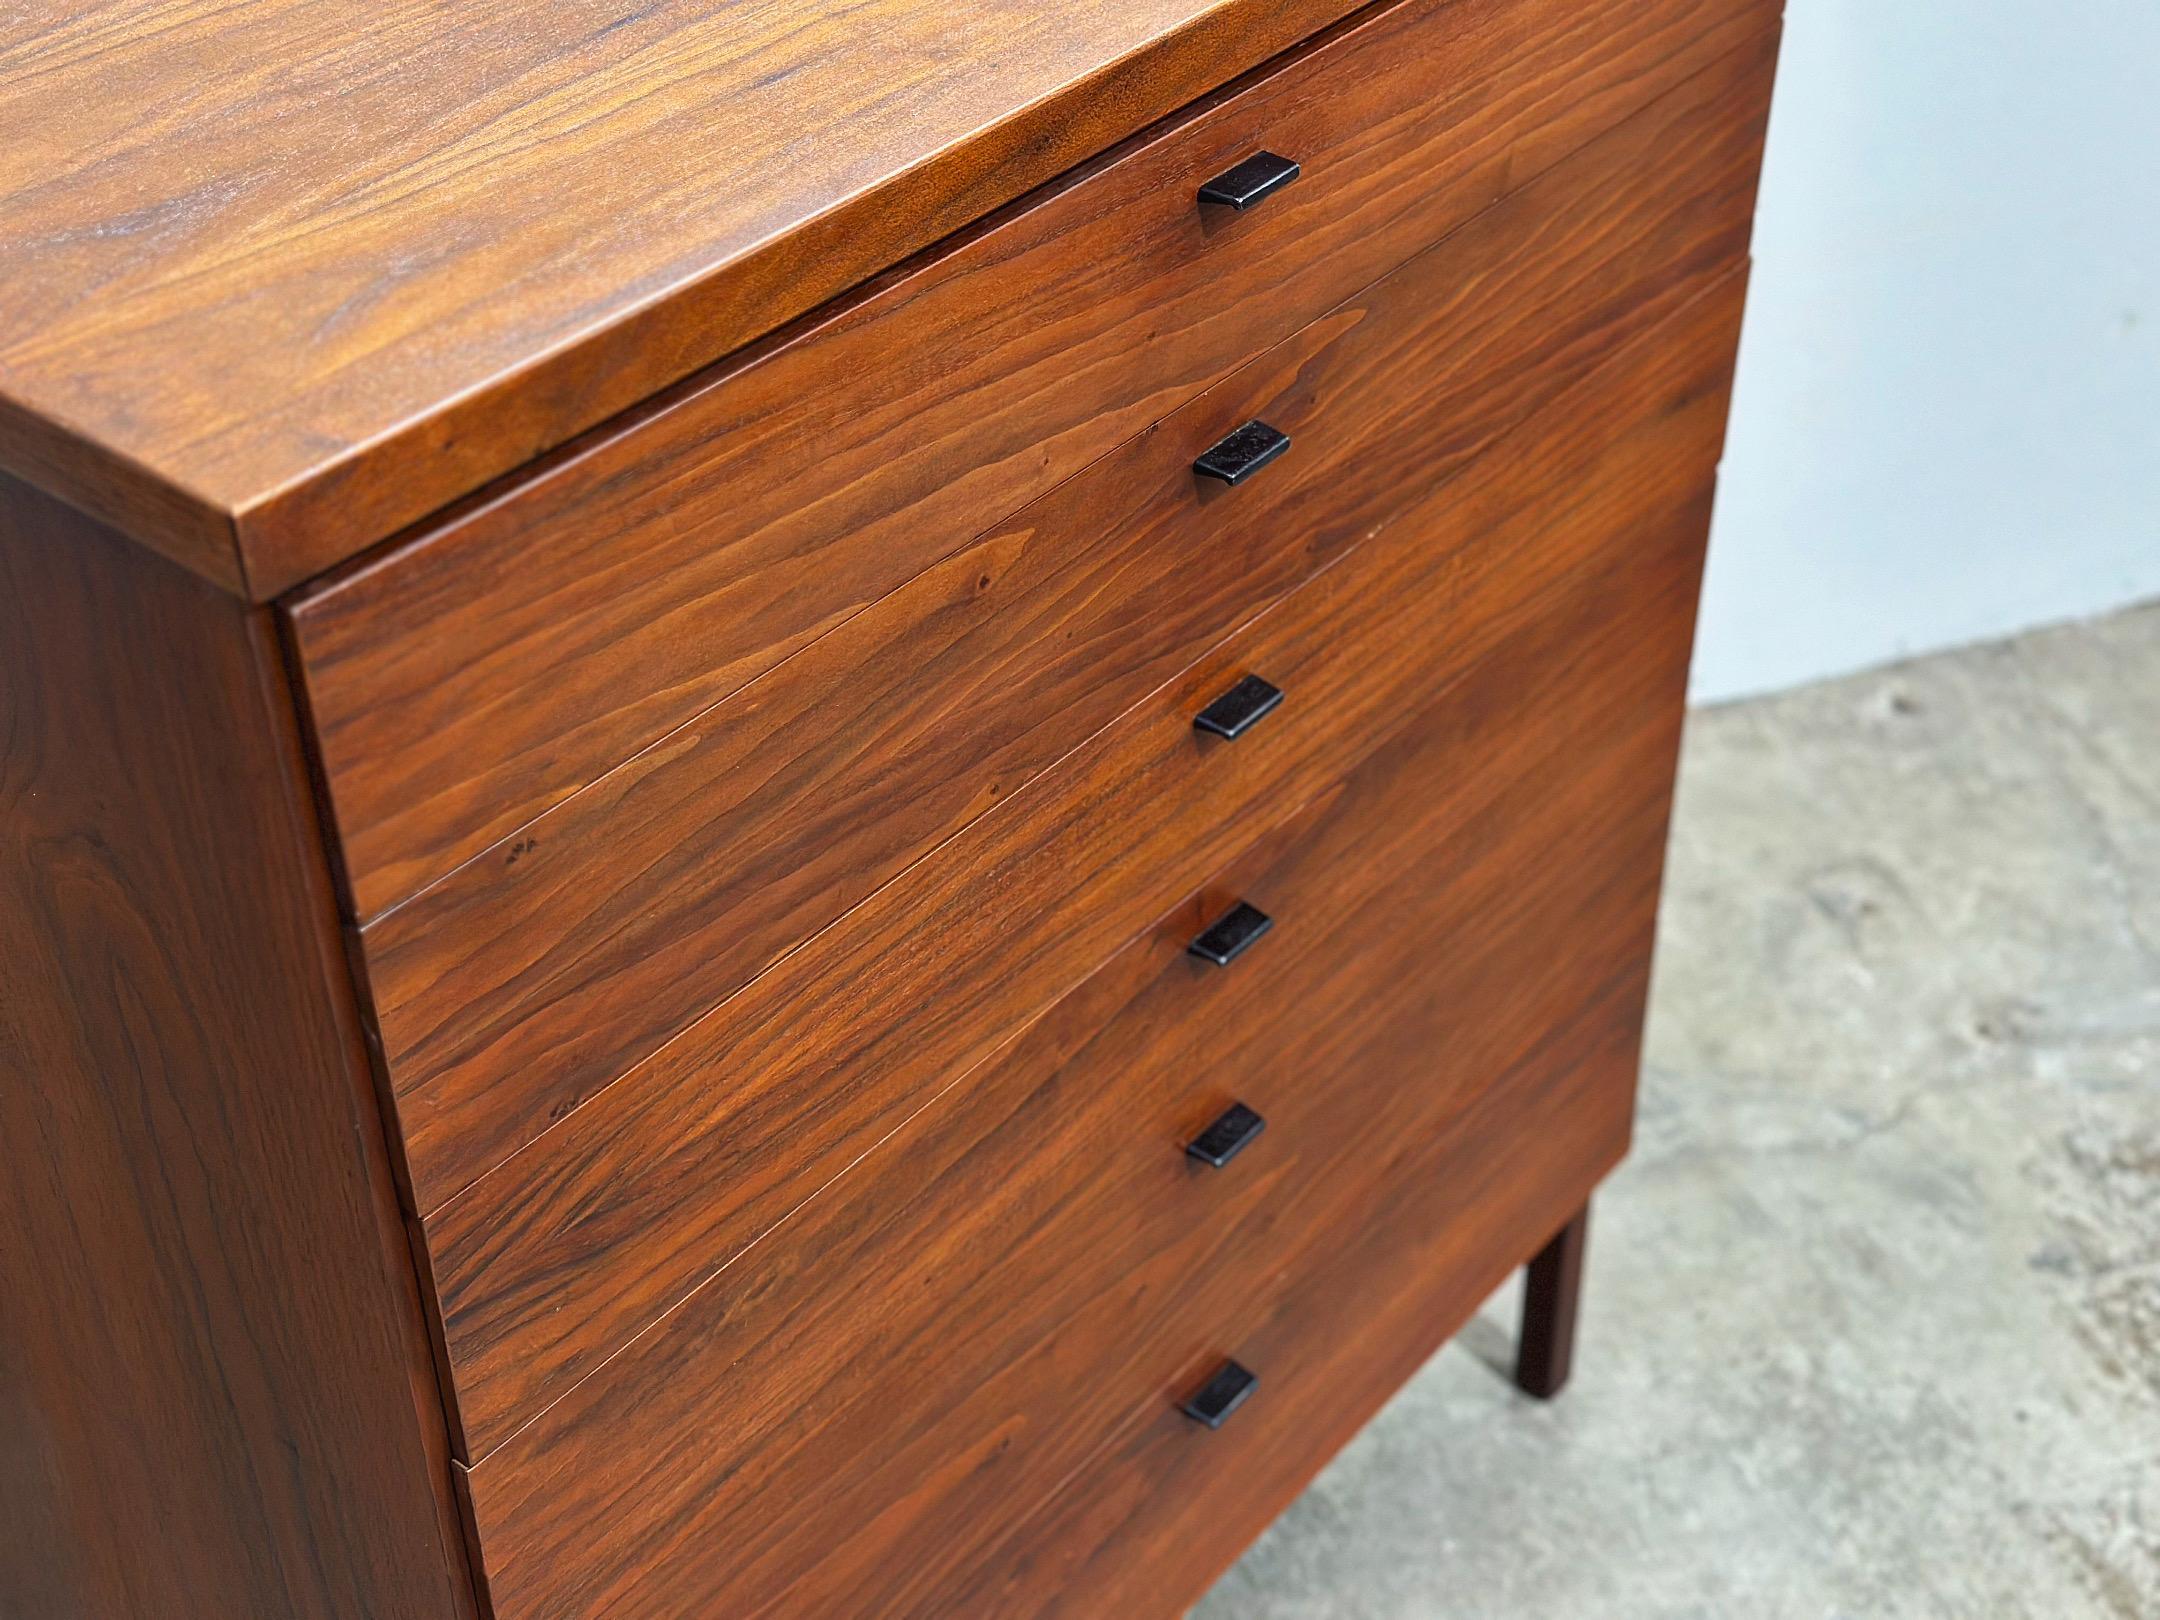 American Midcentury Dresser - Jack Cartwright - Founders Patterns 10 - Tall Highboy Chest